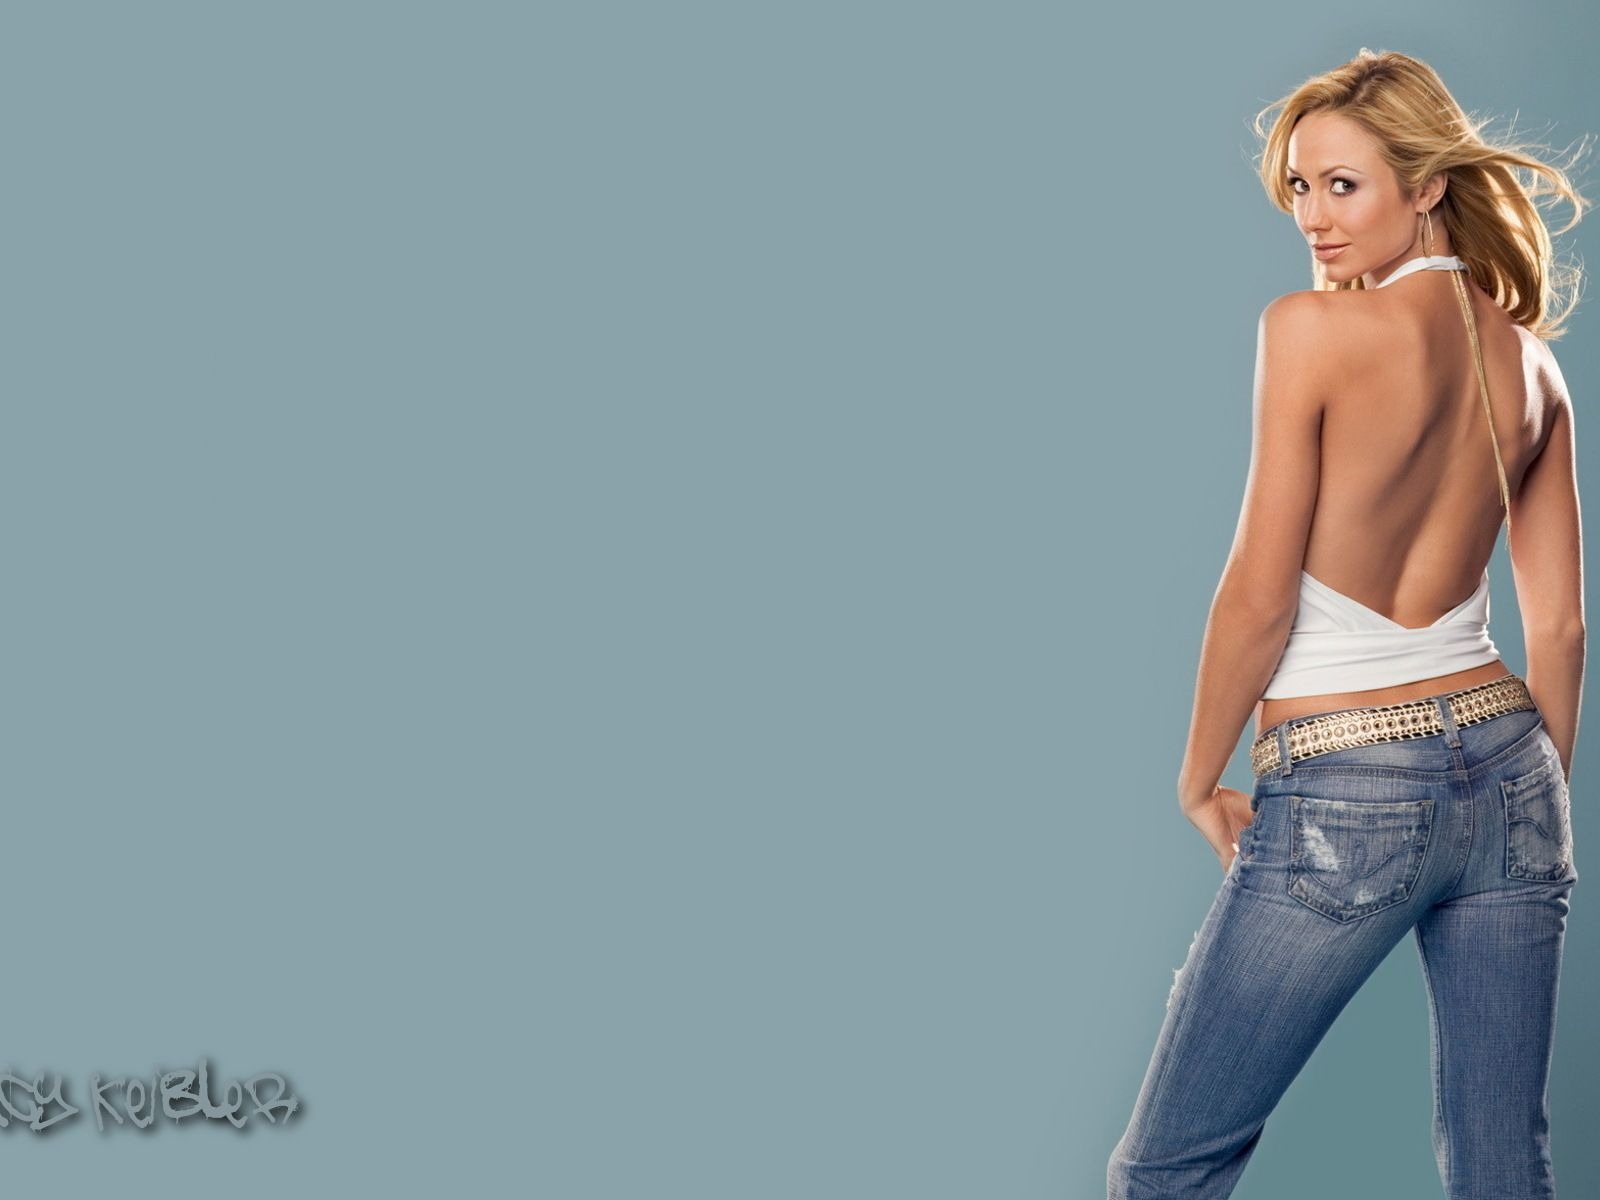 Stacy Keibler #053 - 1600x1200 Wallpapers Pictures Photos Images